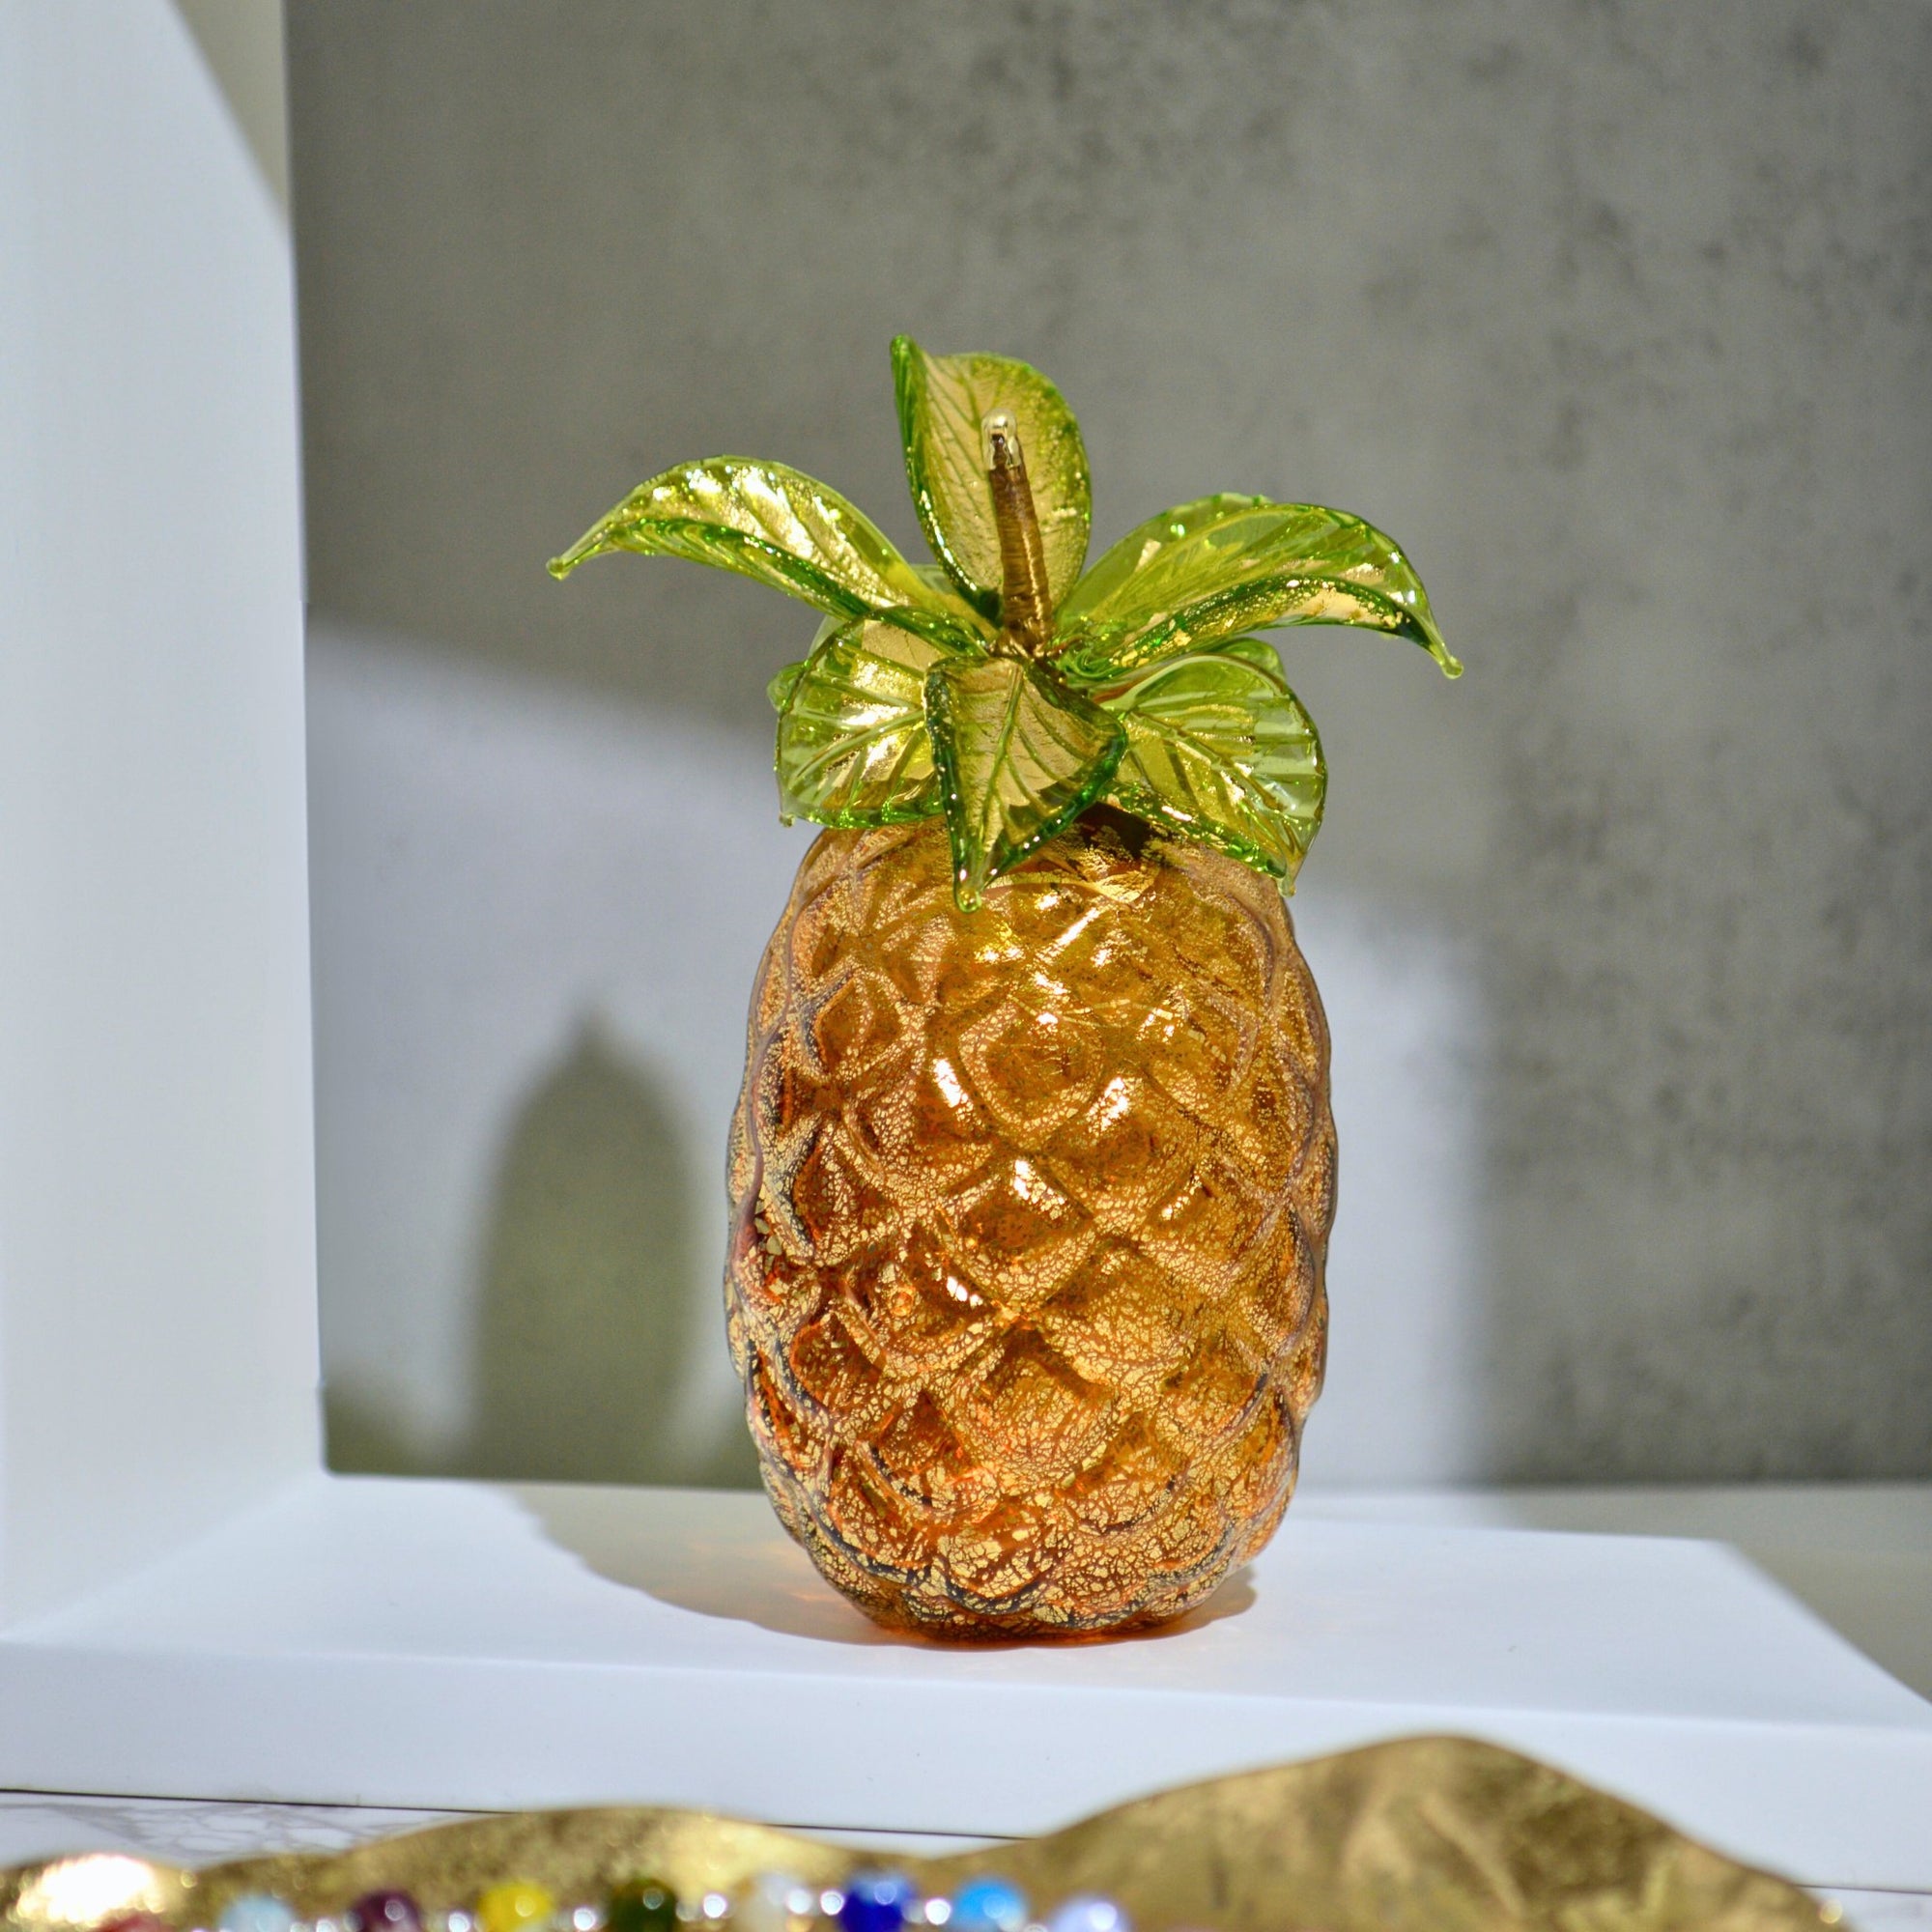 Murano Blown Glass Pineapple, Amber with 24k Gold, Made in Italy - My Italian Decor